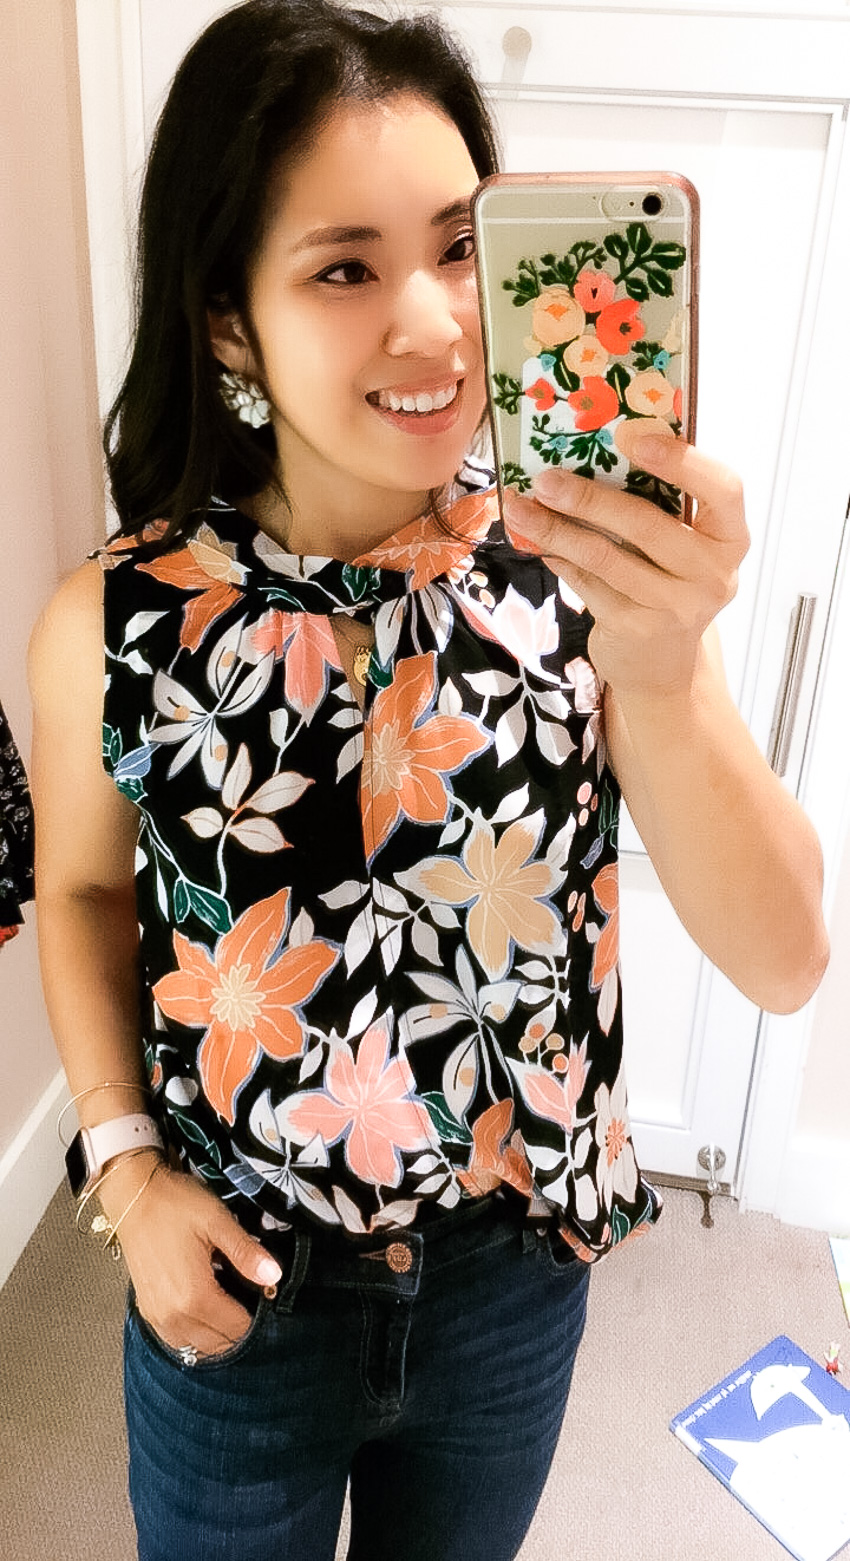 LOFT Sale: Dressing Room Diaries by Dallas fashion blogger cute and little | wild orchid mixed media top | loft dressing room review